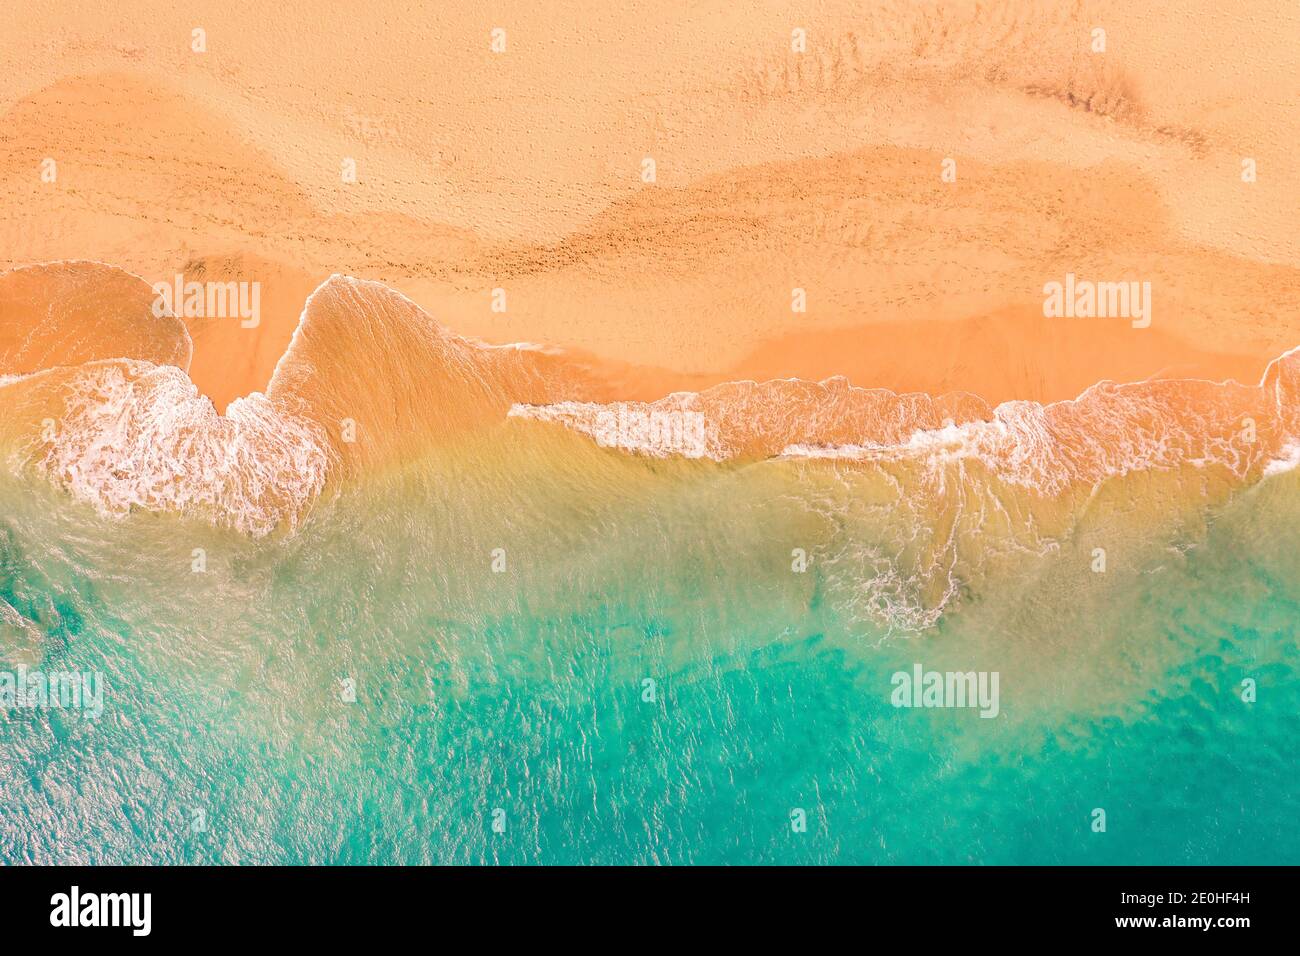 Aerial top down view of beautiful Atlantic ocean coast with crystal clear turquoise water and sandy beach, waves rolling into the shore Stock Photo